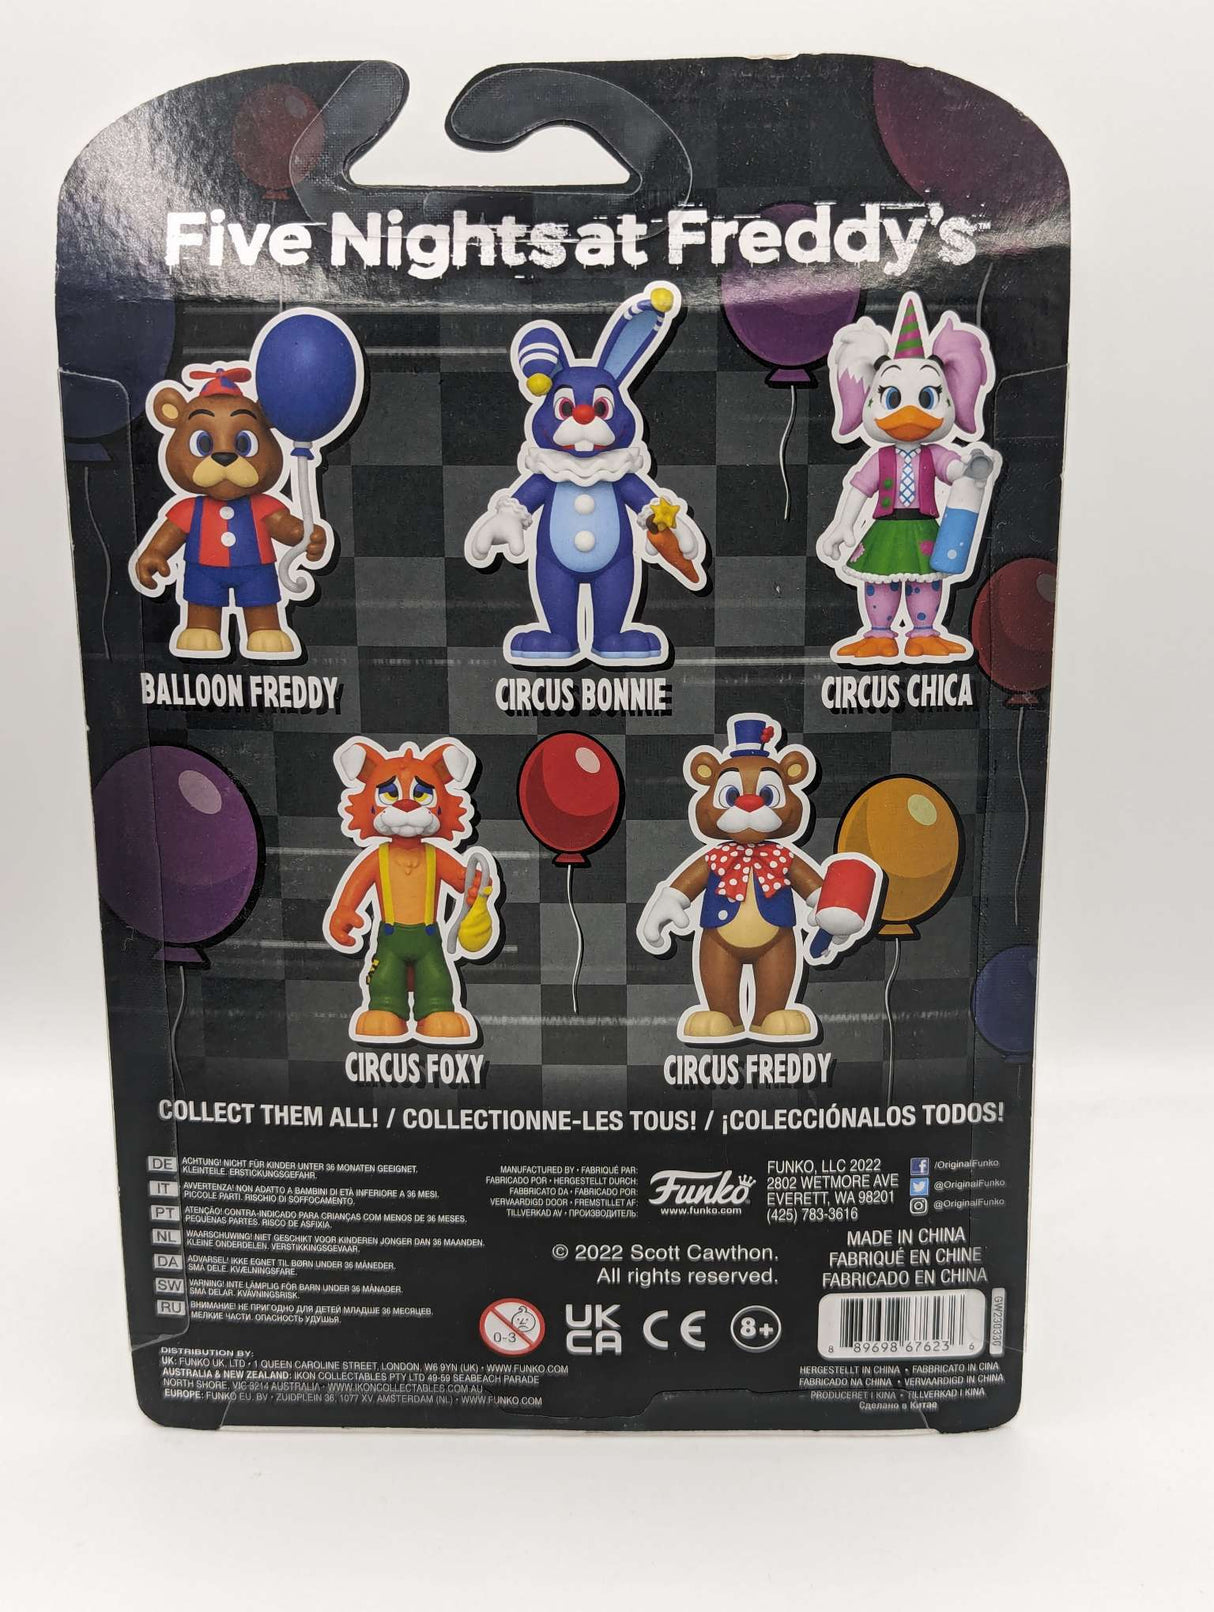 Funko Action Figure | Five Nights At Freddy's (FNAF) | Circus Foxy